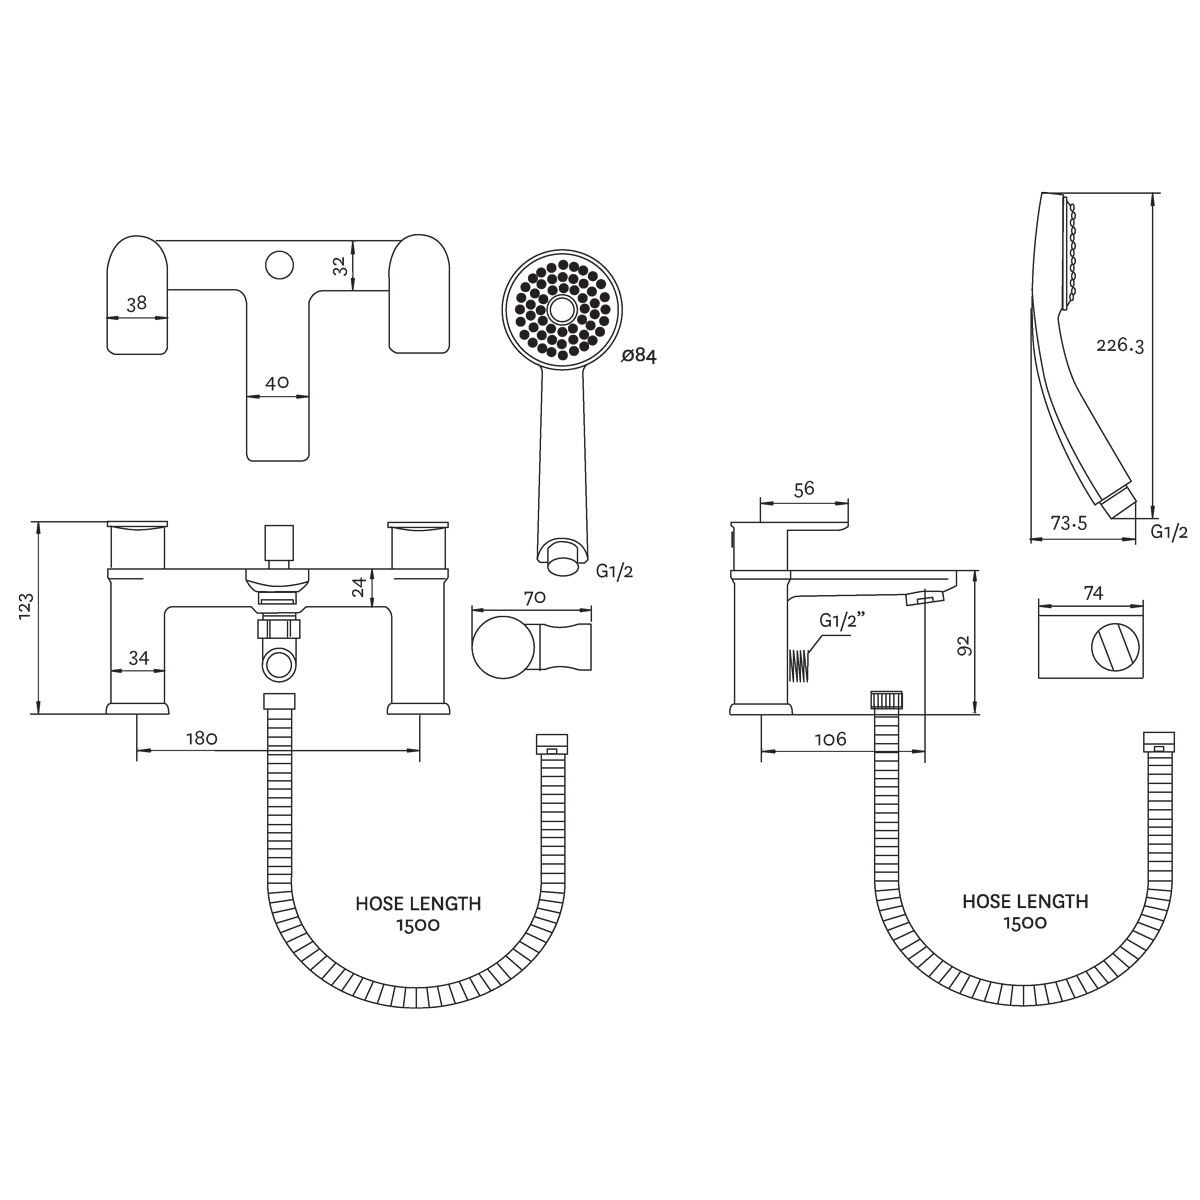 Line drawing of tap with dimensions on white background